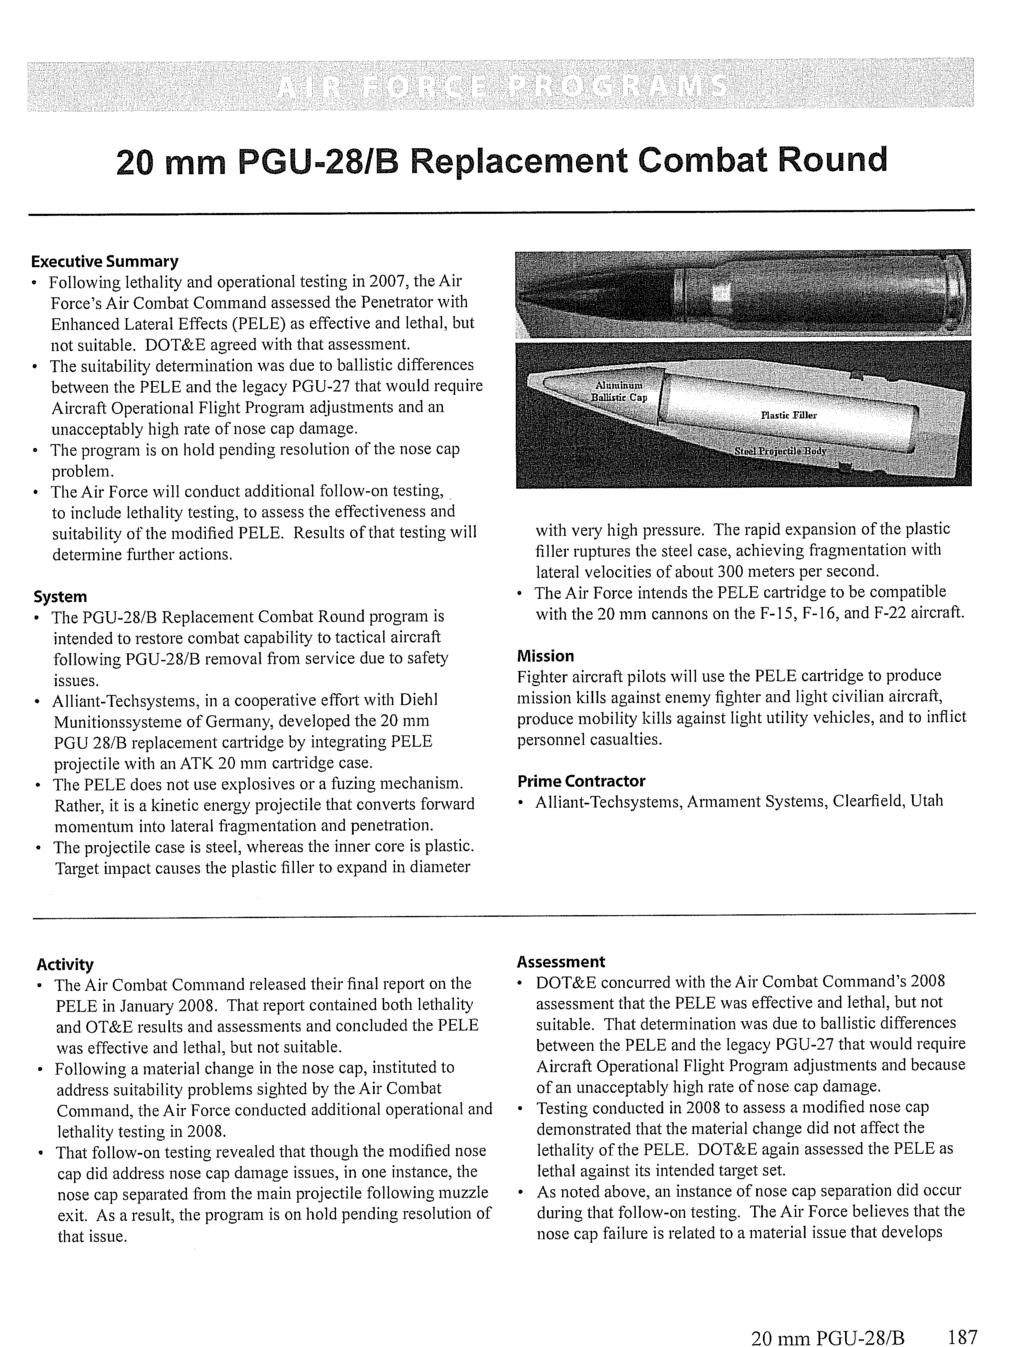 20 mm PGU-28/B 187 20 mm PGU-28/B Replacement Combat Round Executive Summary Following lethality and operational testing in 2007, the Air Force's Air Combat Command assessed the Penetrator with